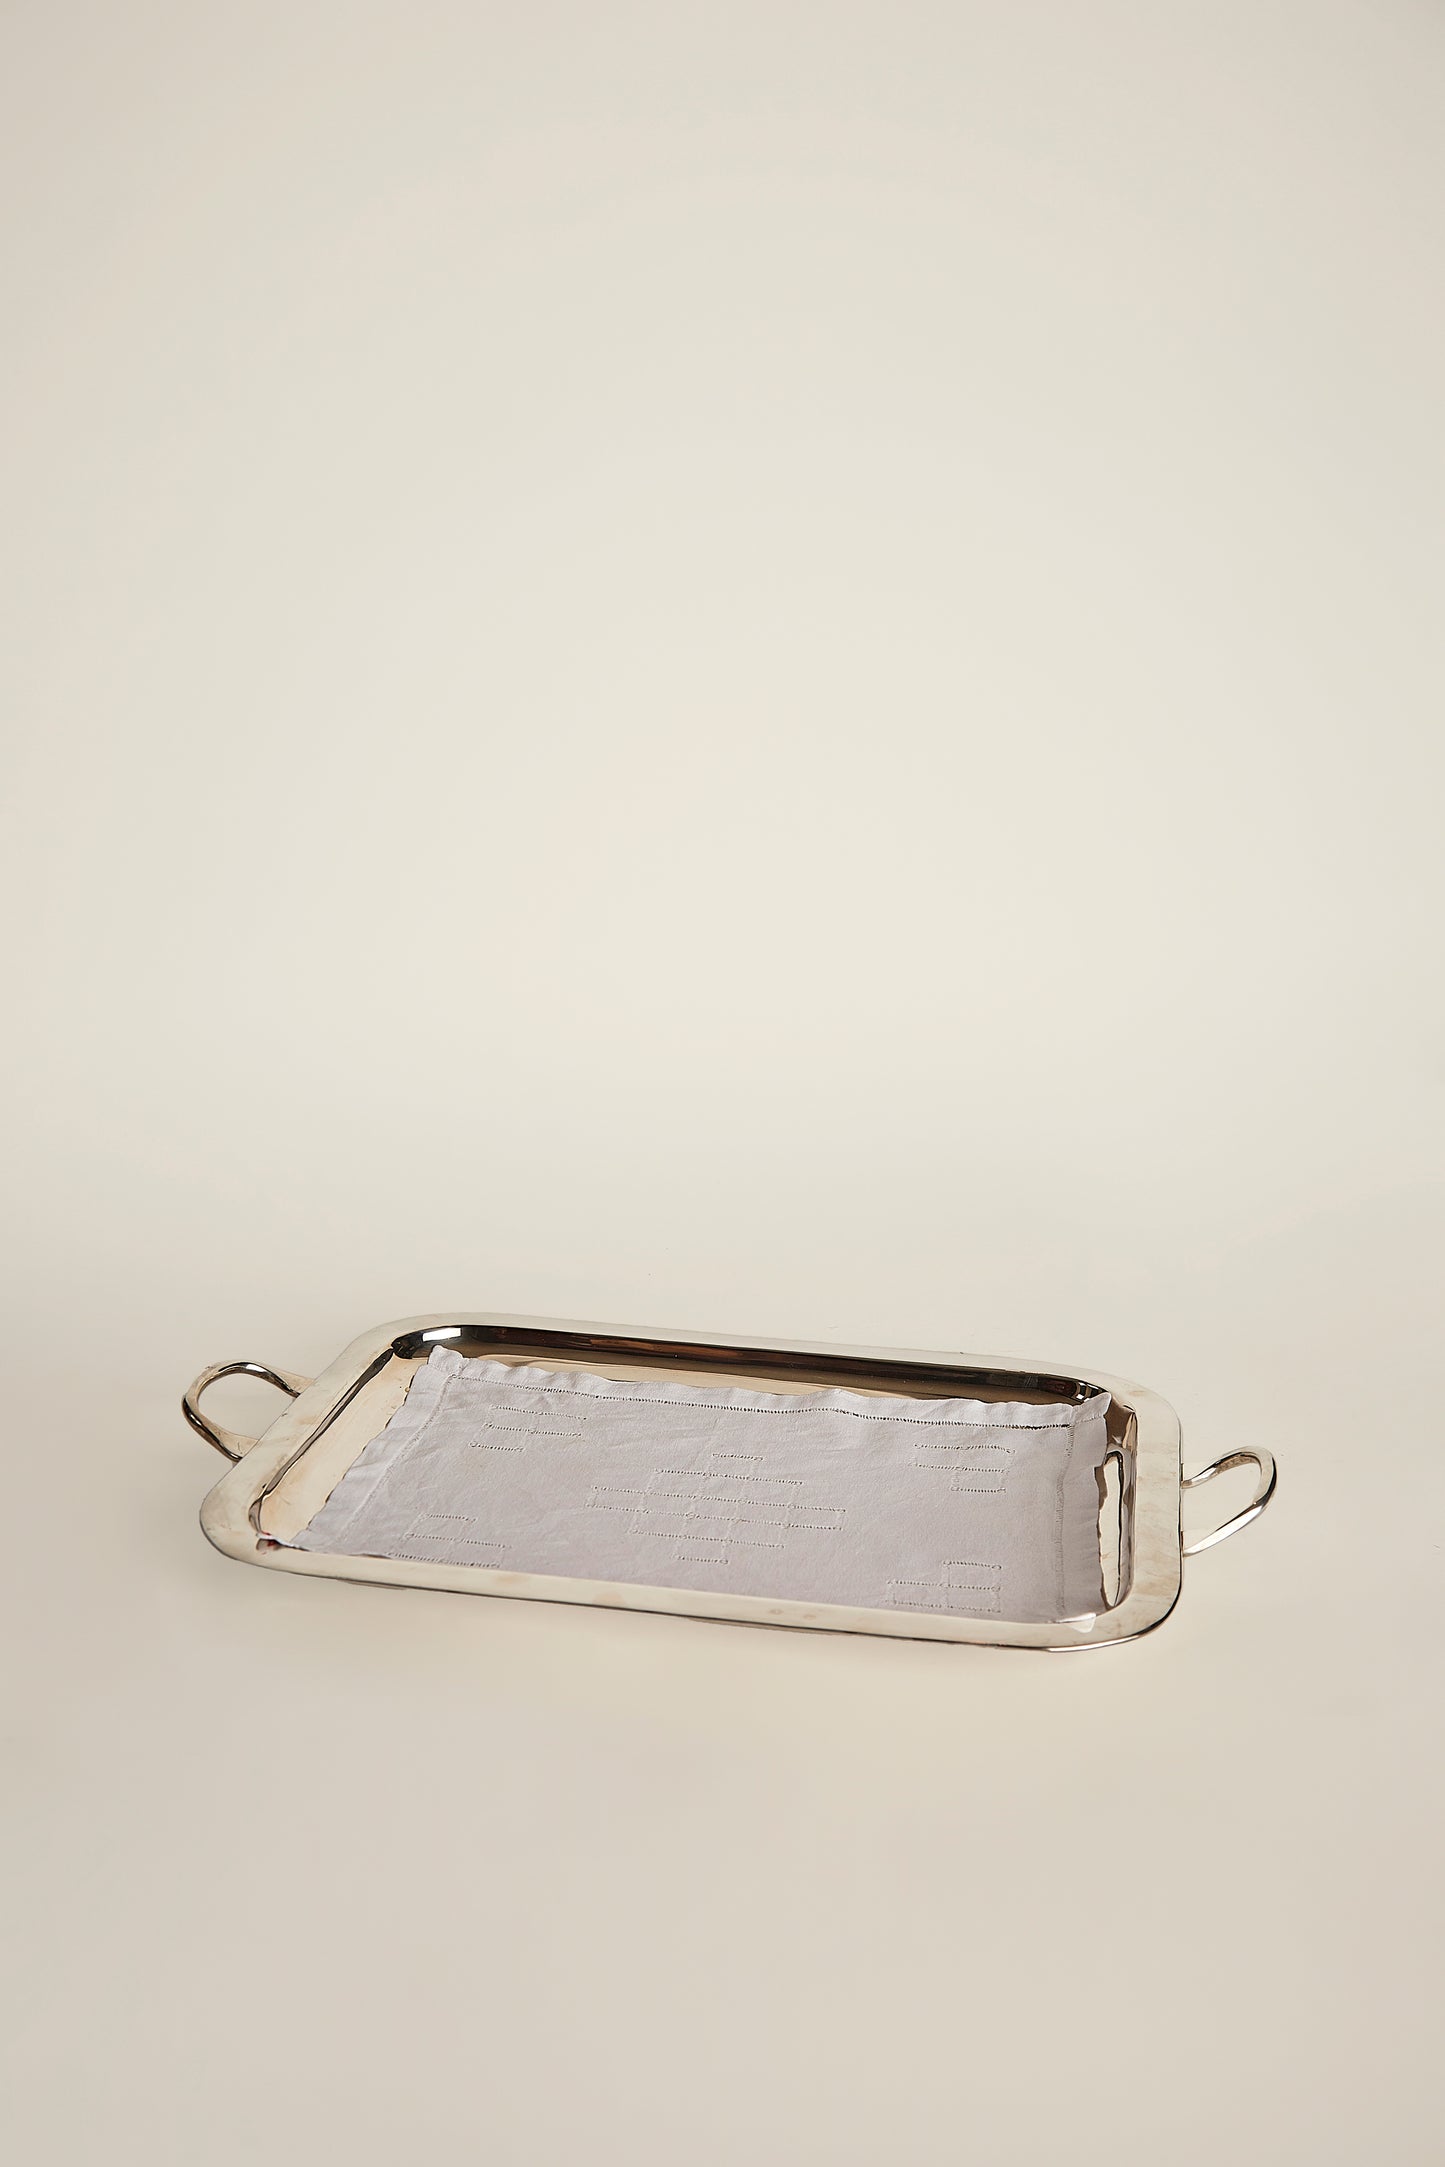 Silver plated brass tray